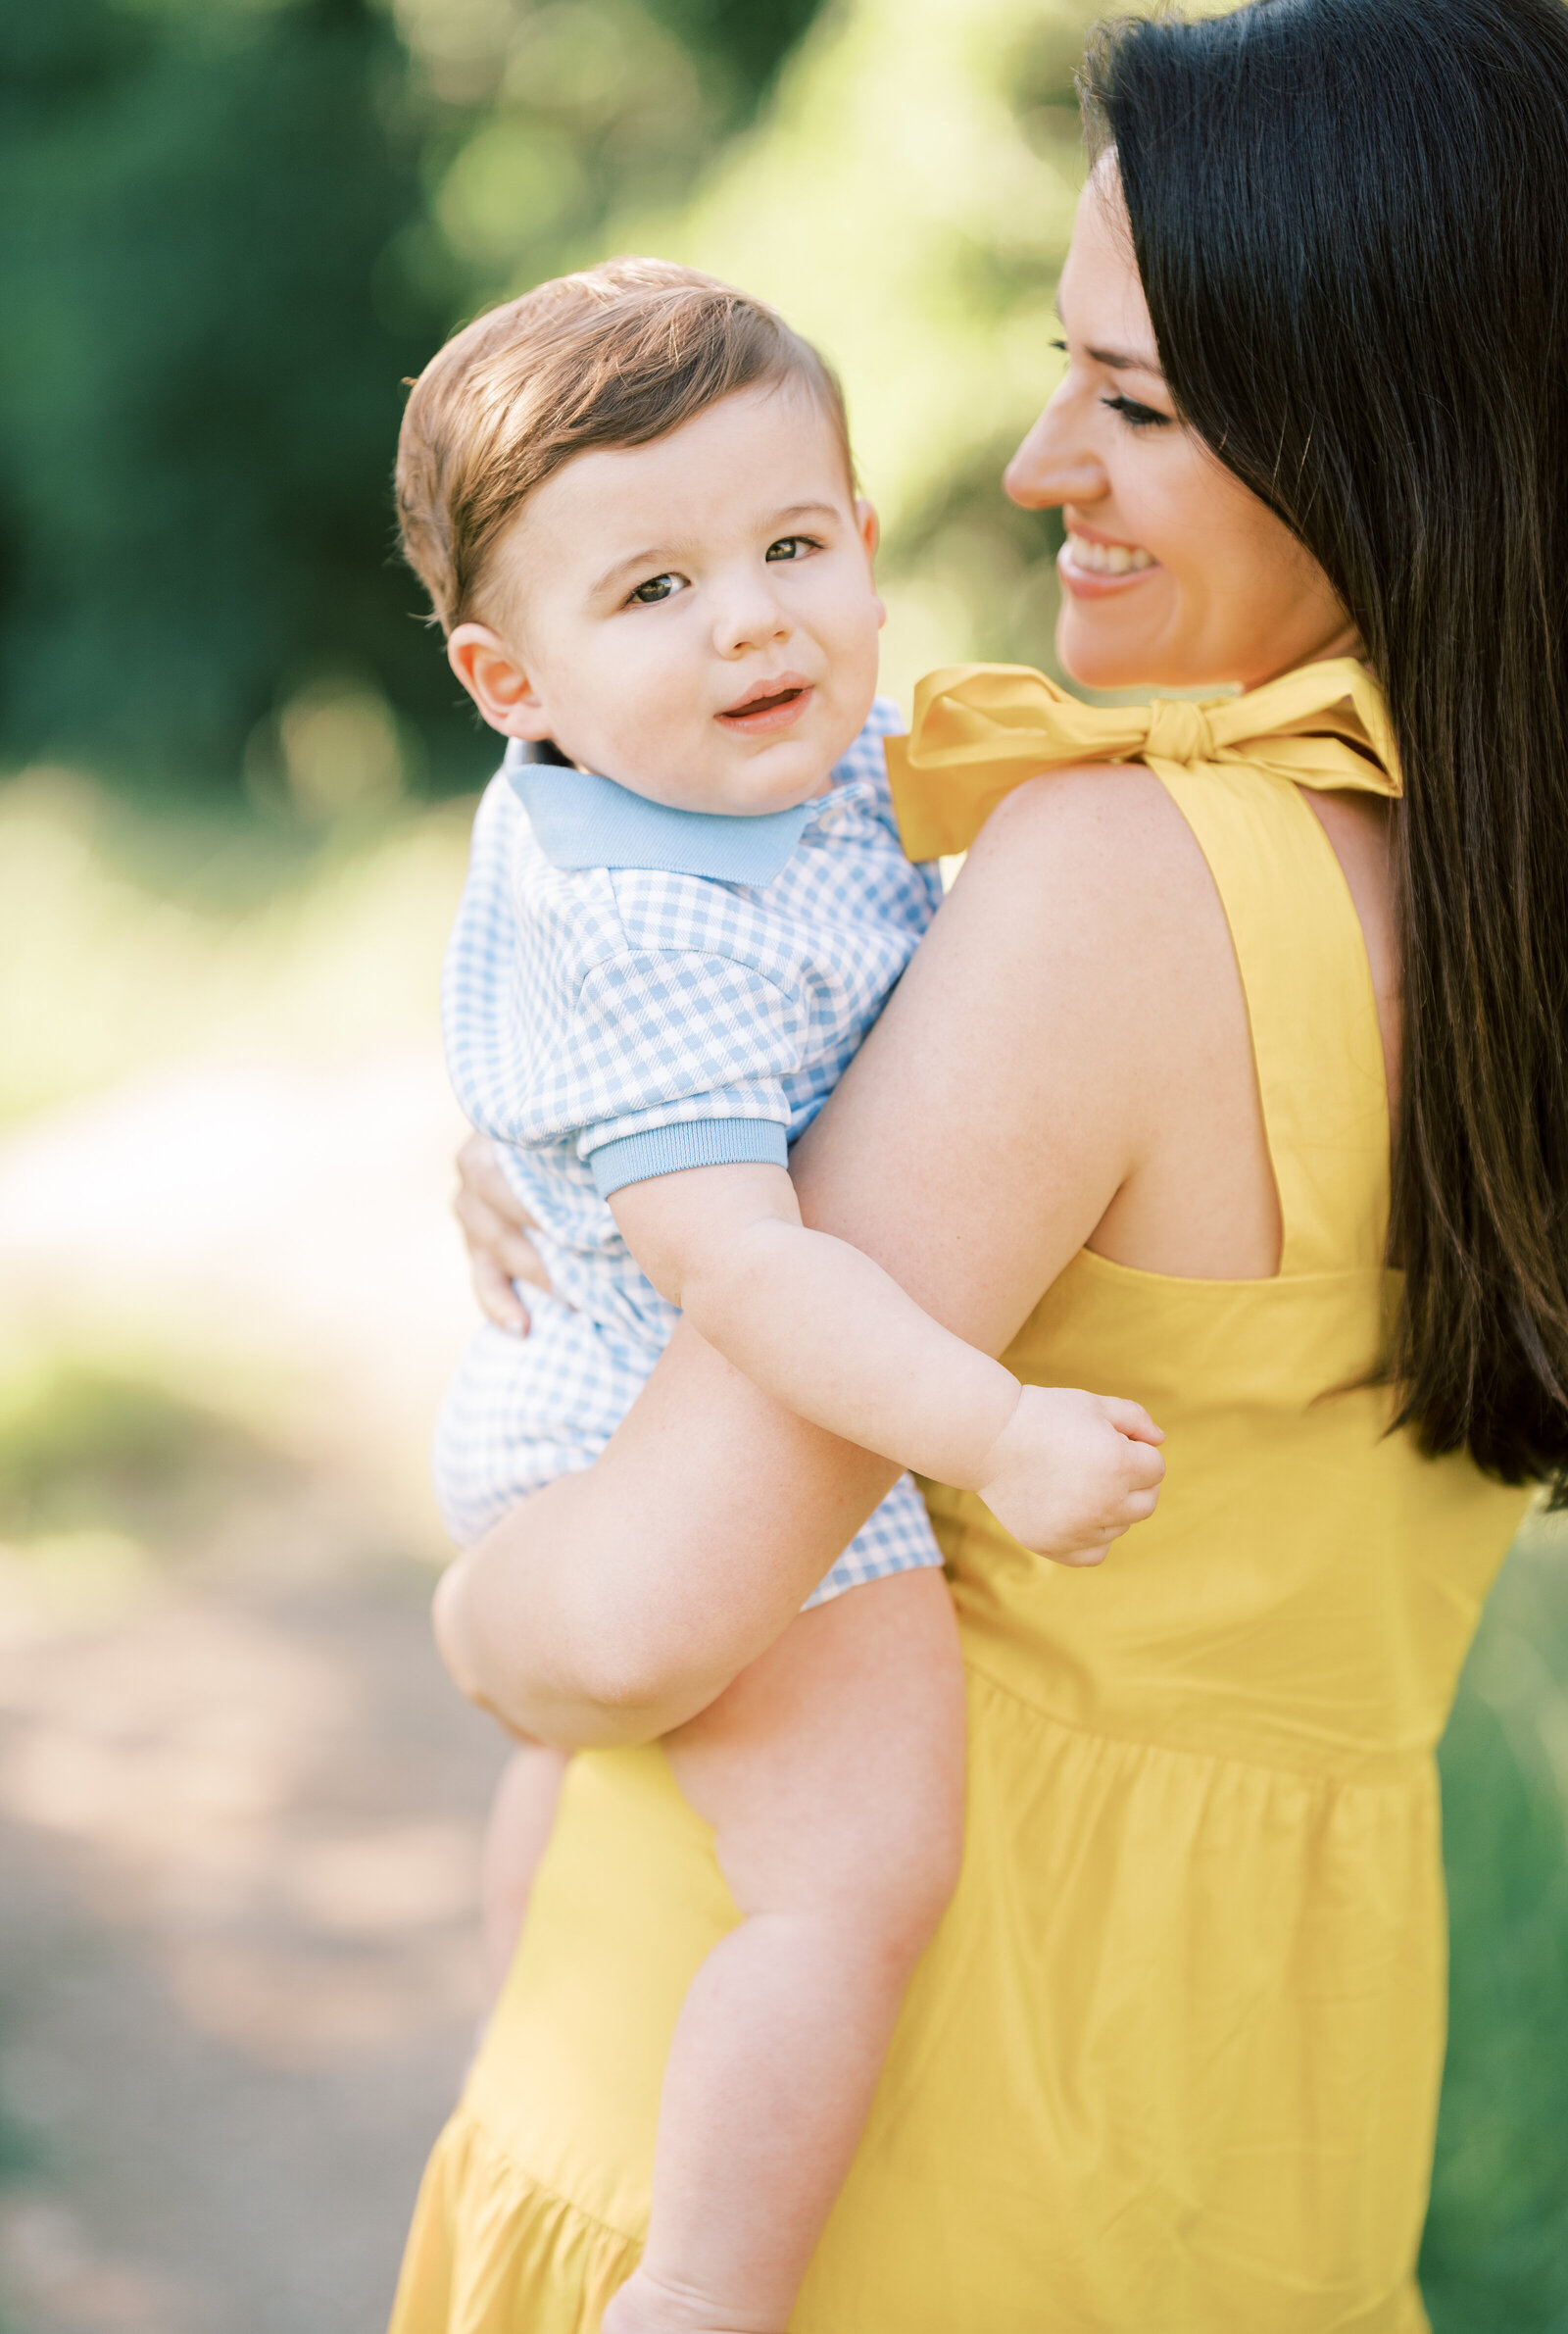 Portrait of a woman in a yellow dress smiling and holding a baby boy on her hip in the outdoors